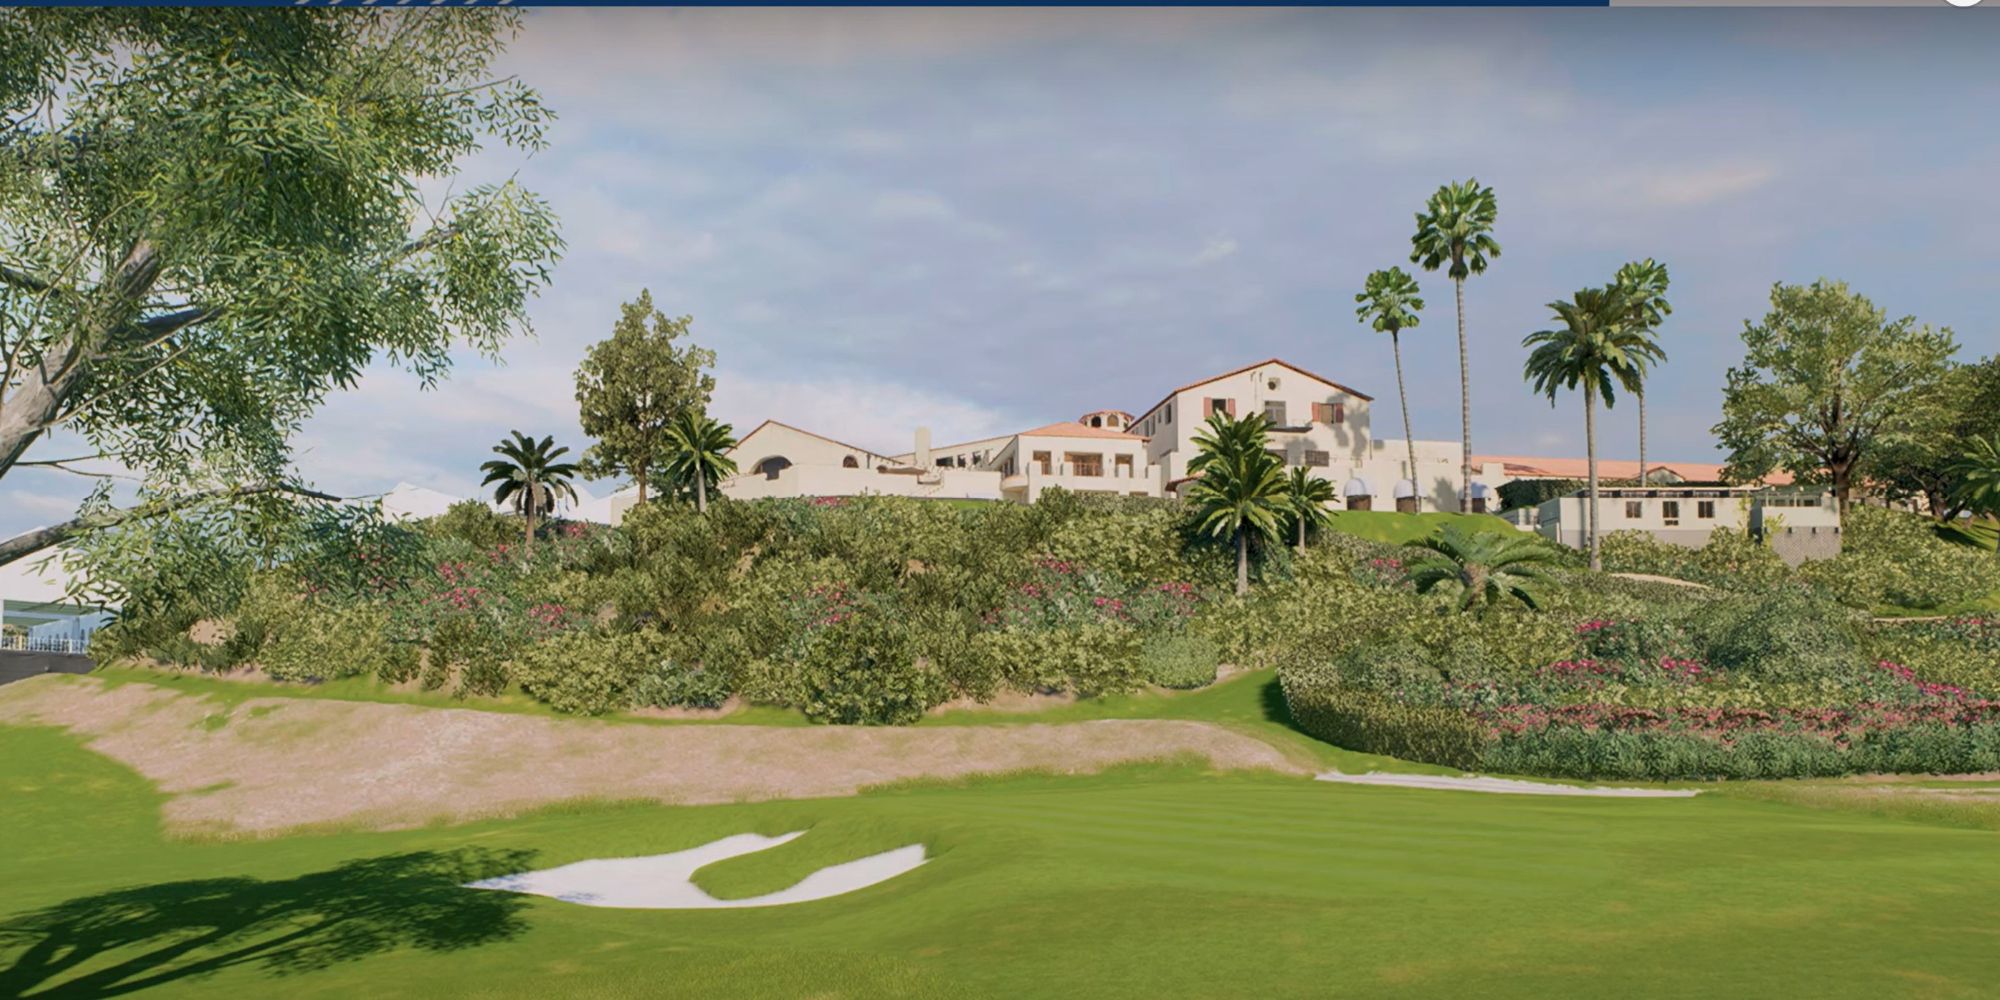 The Riviera Country Club course from EA Sports PGA Tour